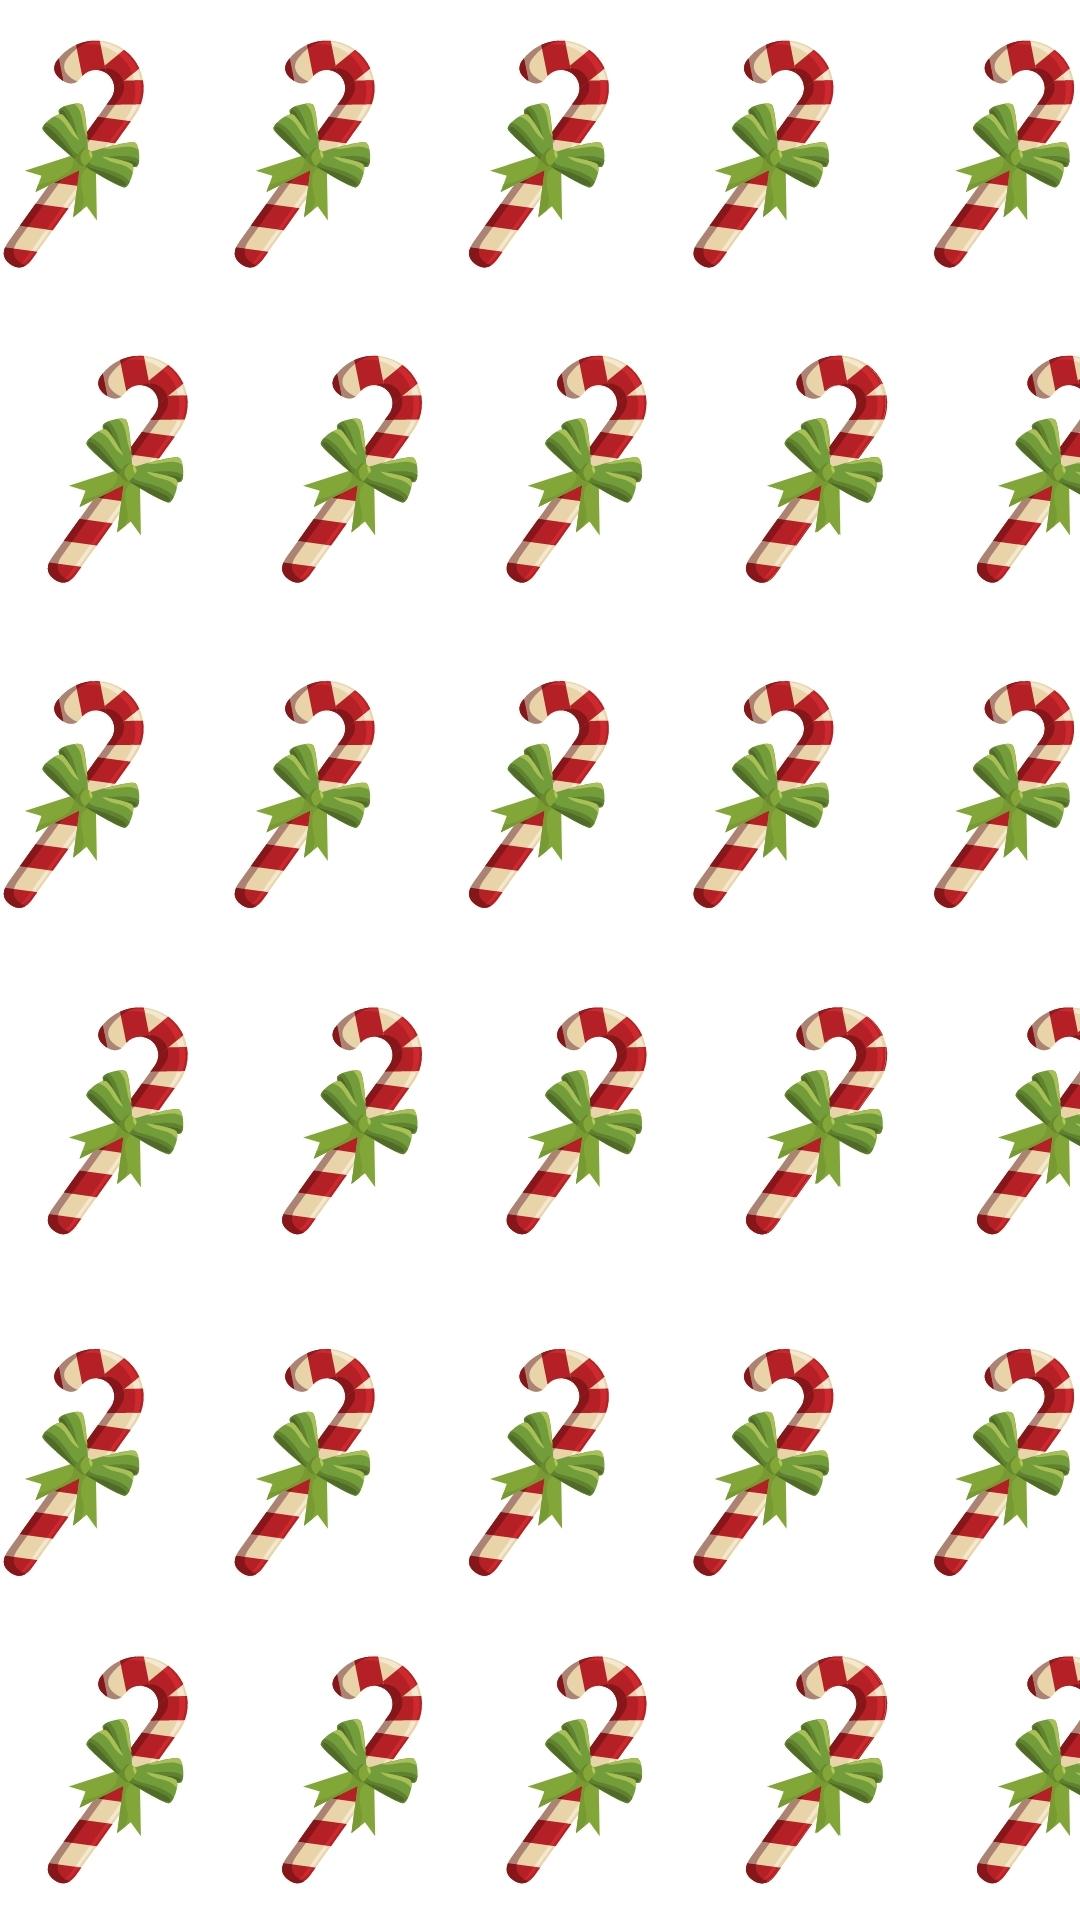 A pattern of repeating red and white candy canes with bows used as a phone wallpaper background.